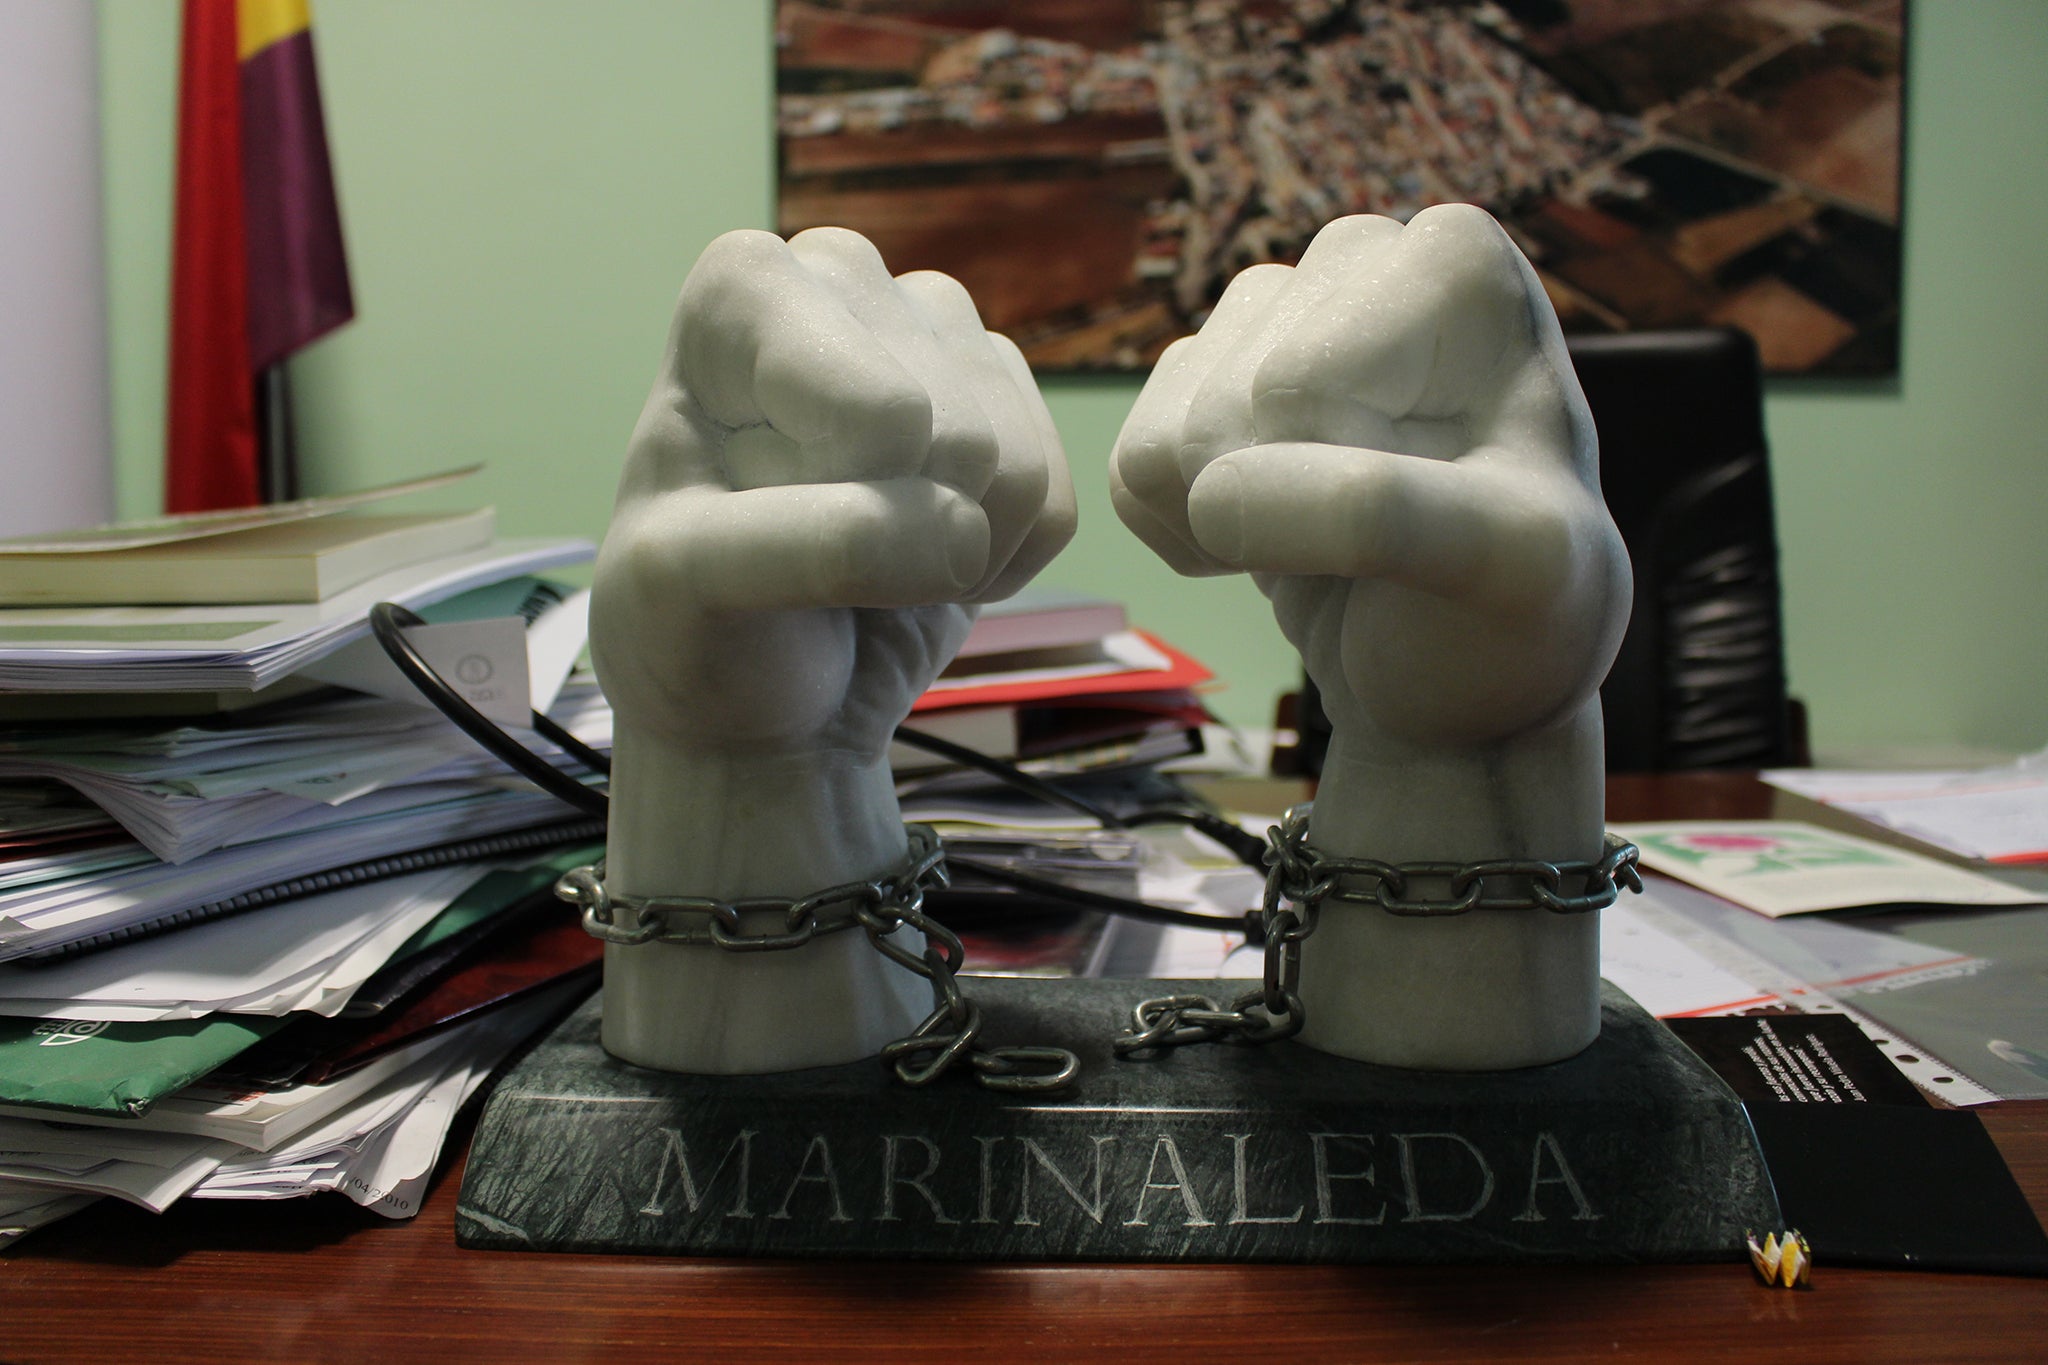 A sculpture of two marble fists takes pride of place on a desk in the office